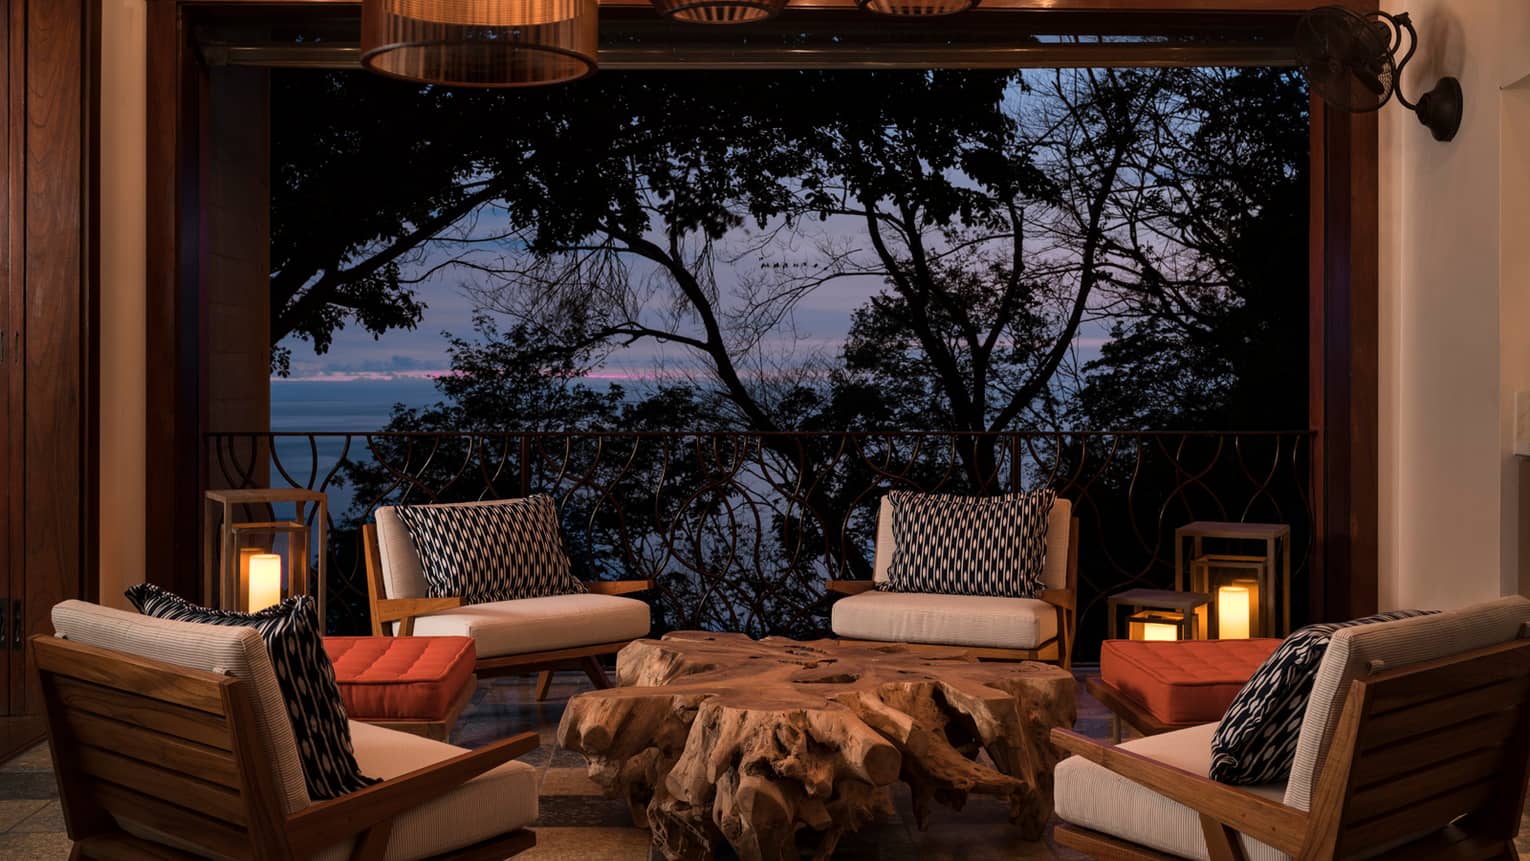 Sitting Area with Night Ocean View